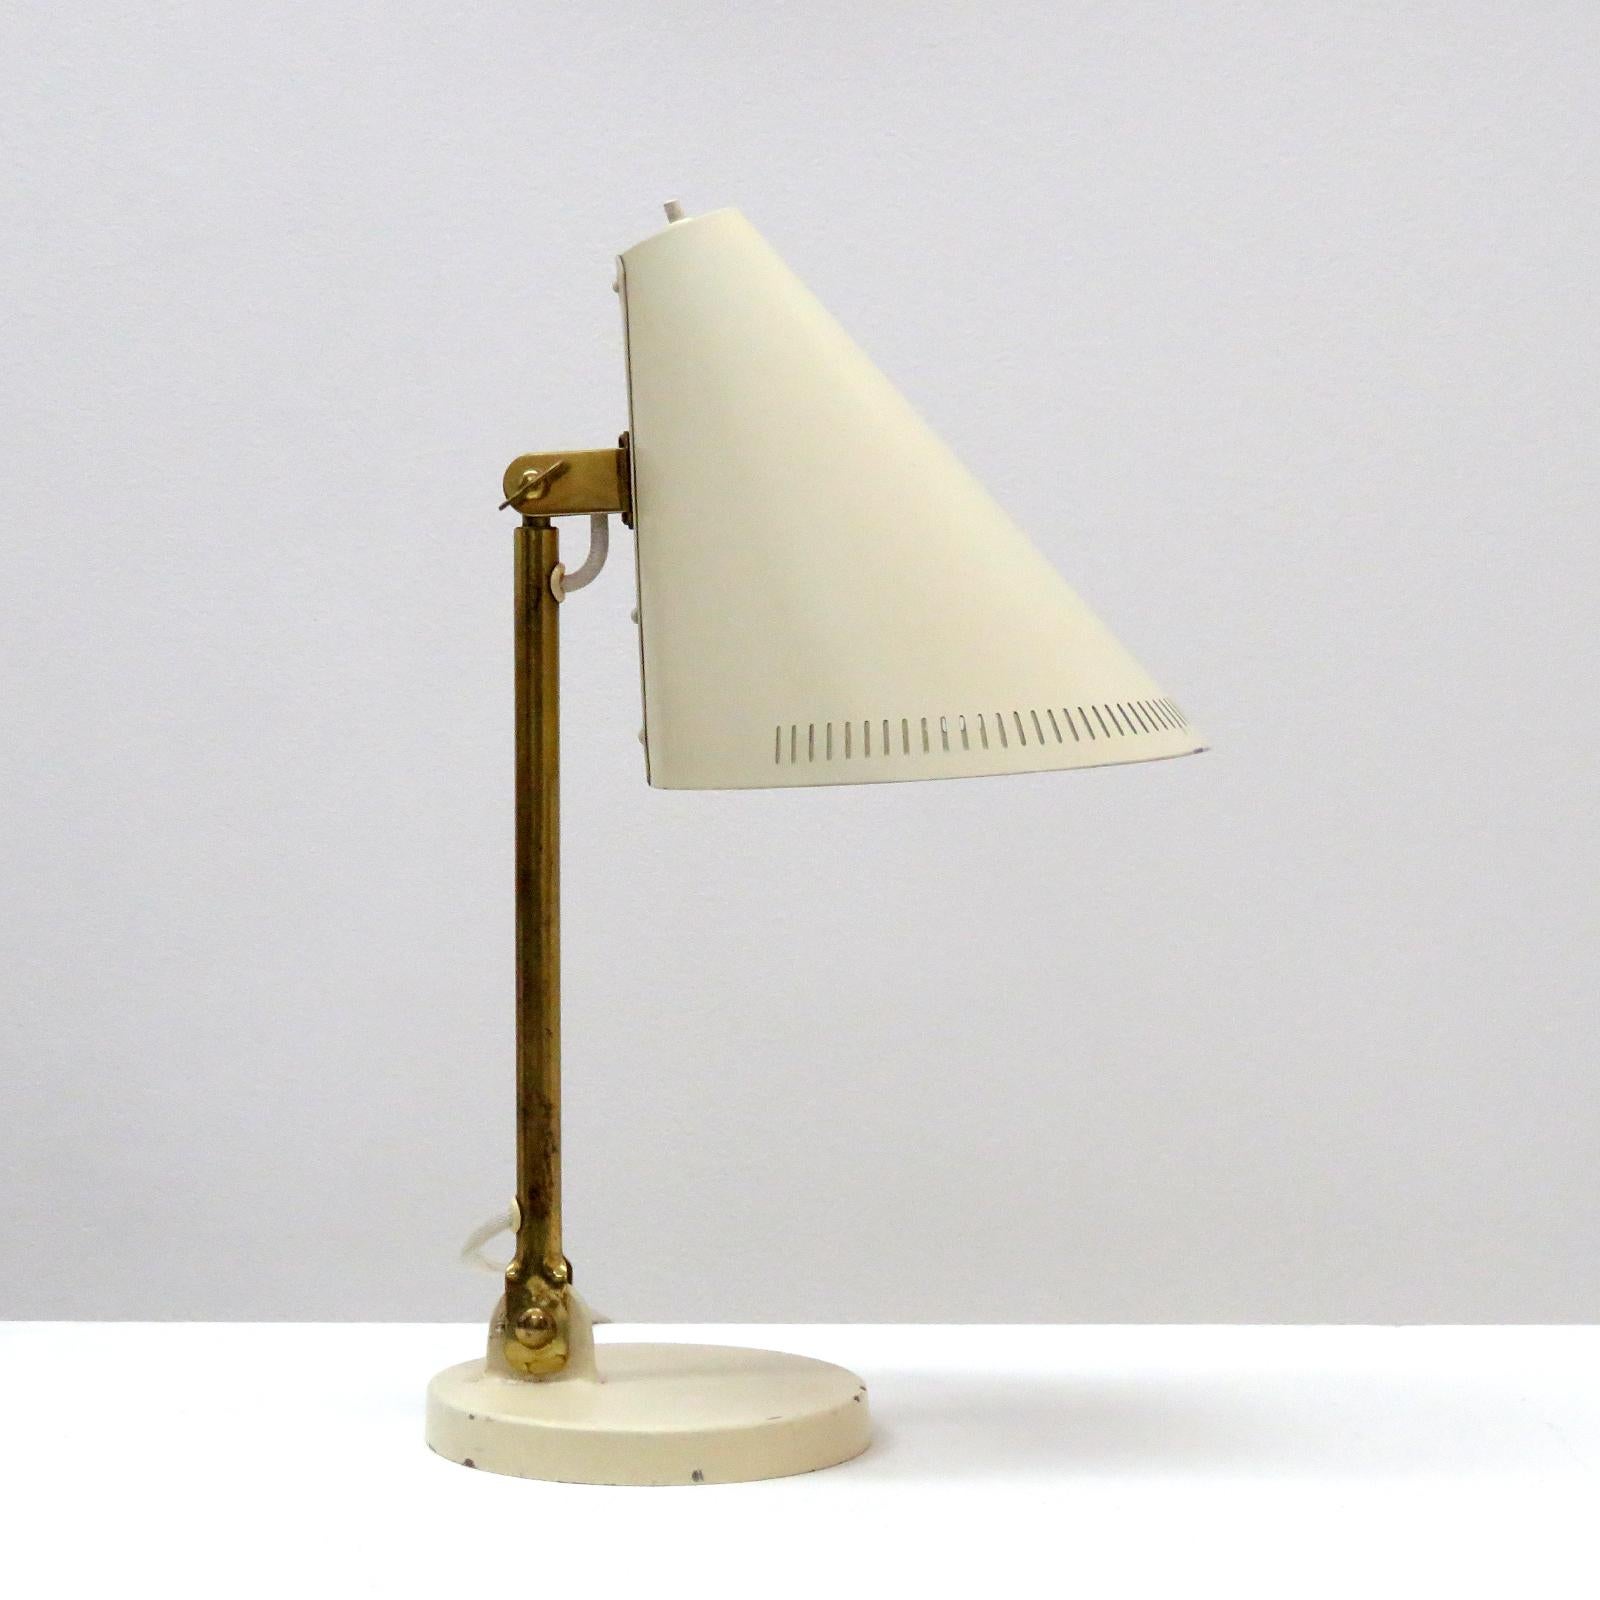 Scandinavian Modern Desk Lamp by Paavo Tynell for Taito, 1950